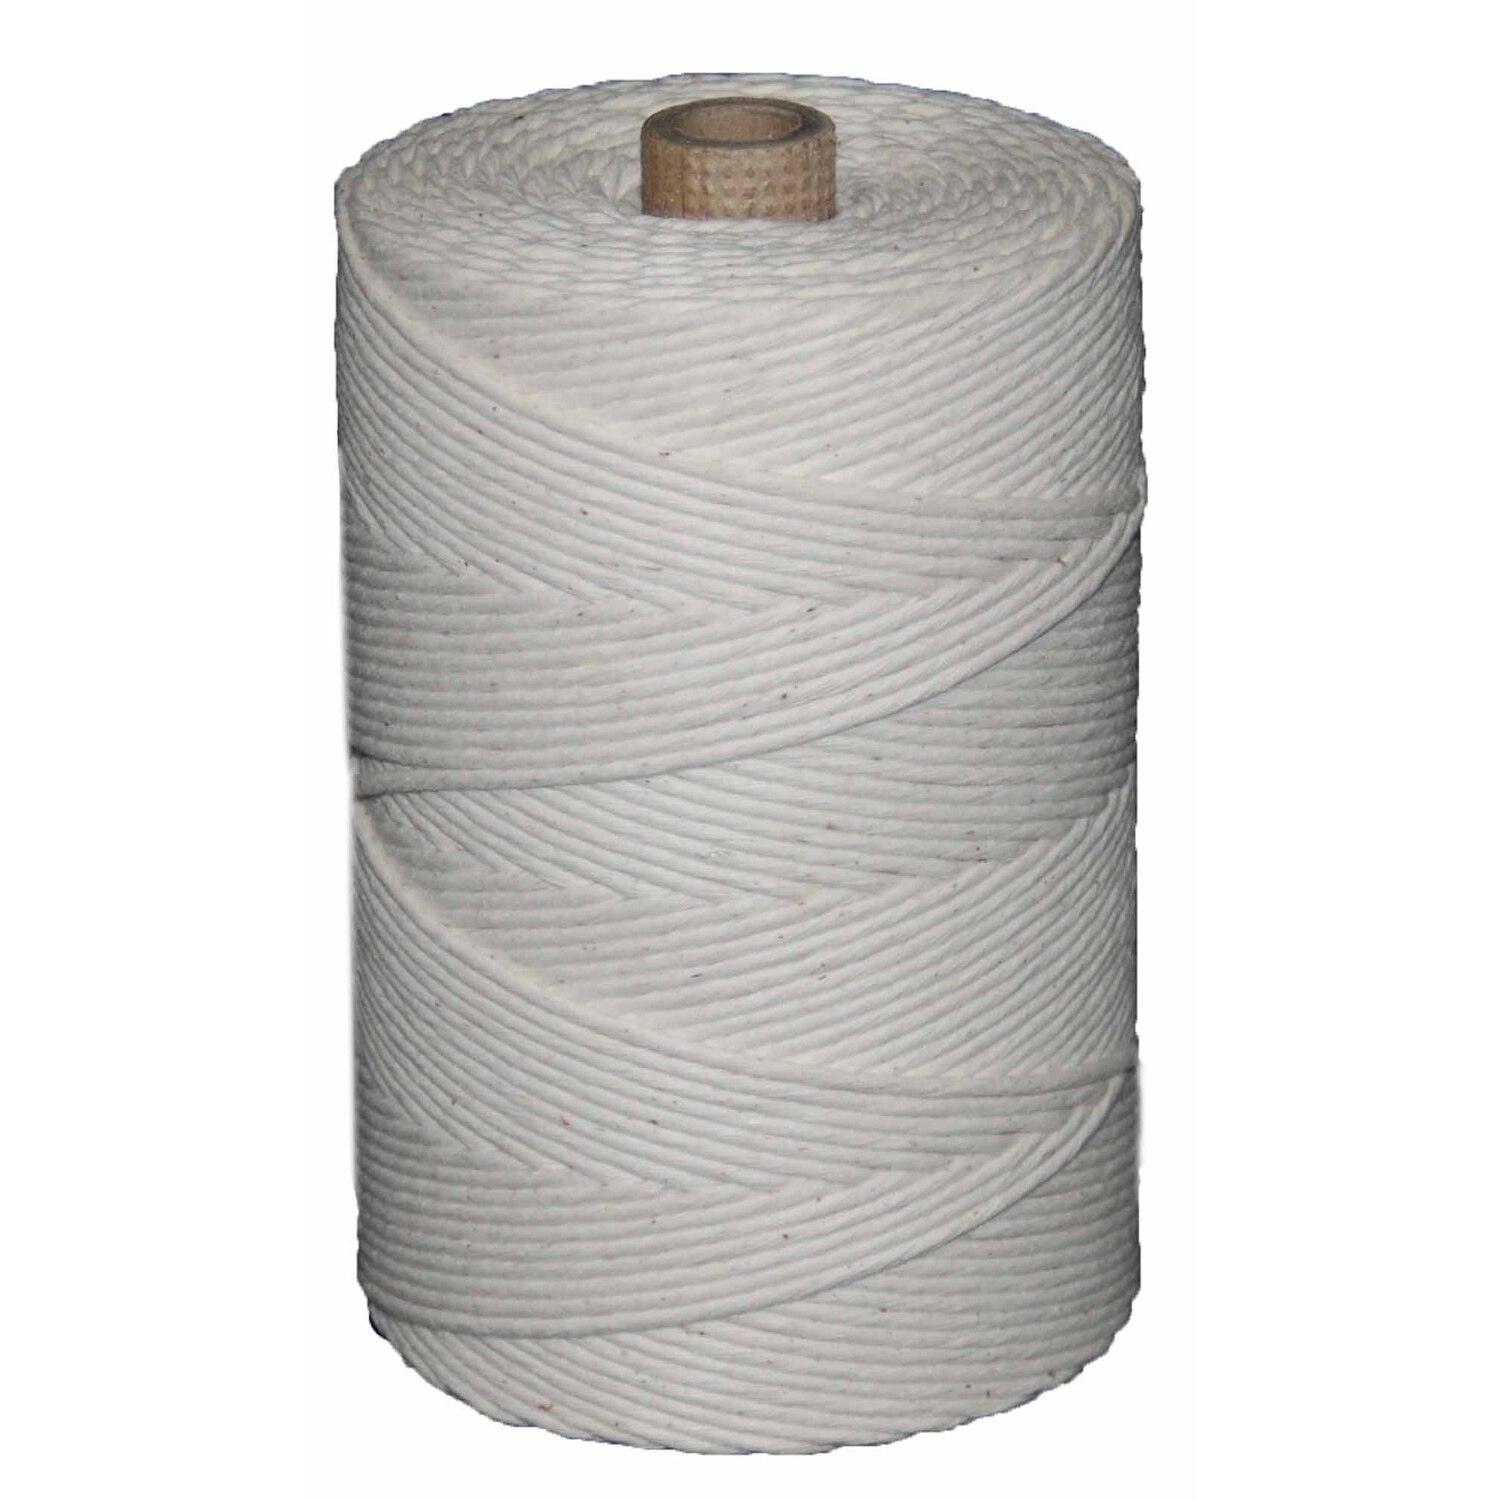 T.W. Evans Cordage  Number 4.5 Polished Beef Cotton Twine with 2 Pound Tube with 950 ft. - image 1 of 1